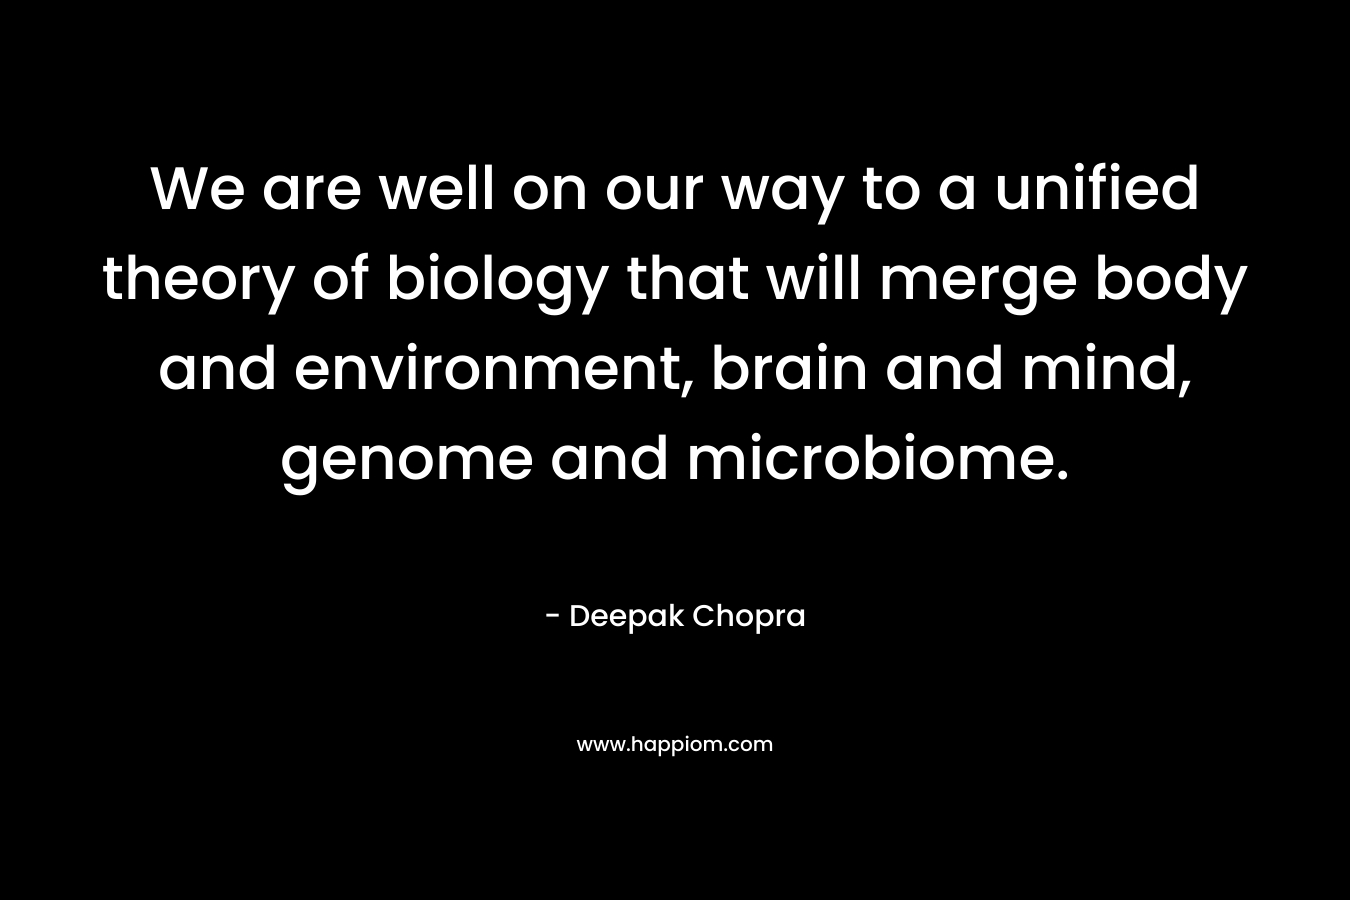 We are well on our way to a unified theory of biology that will merge body and environment, brain and mind, genome and microbiome. – Deepak Chopra